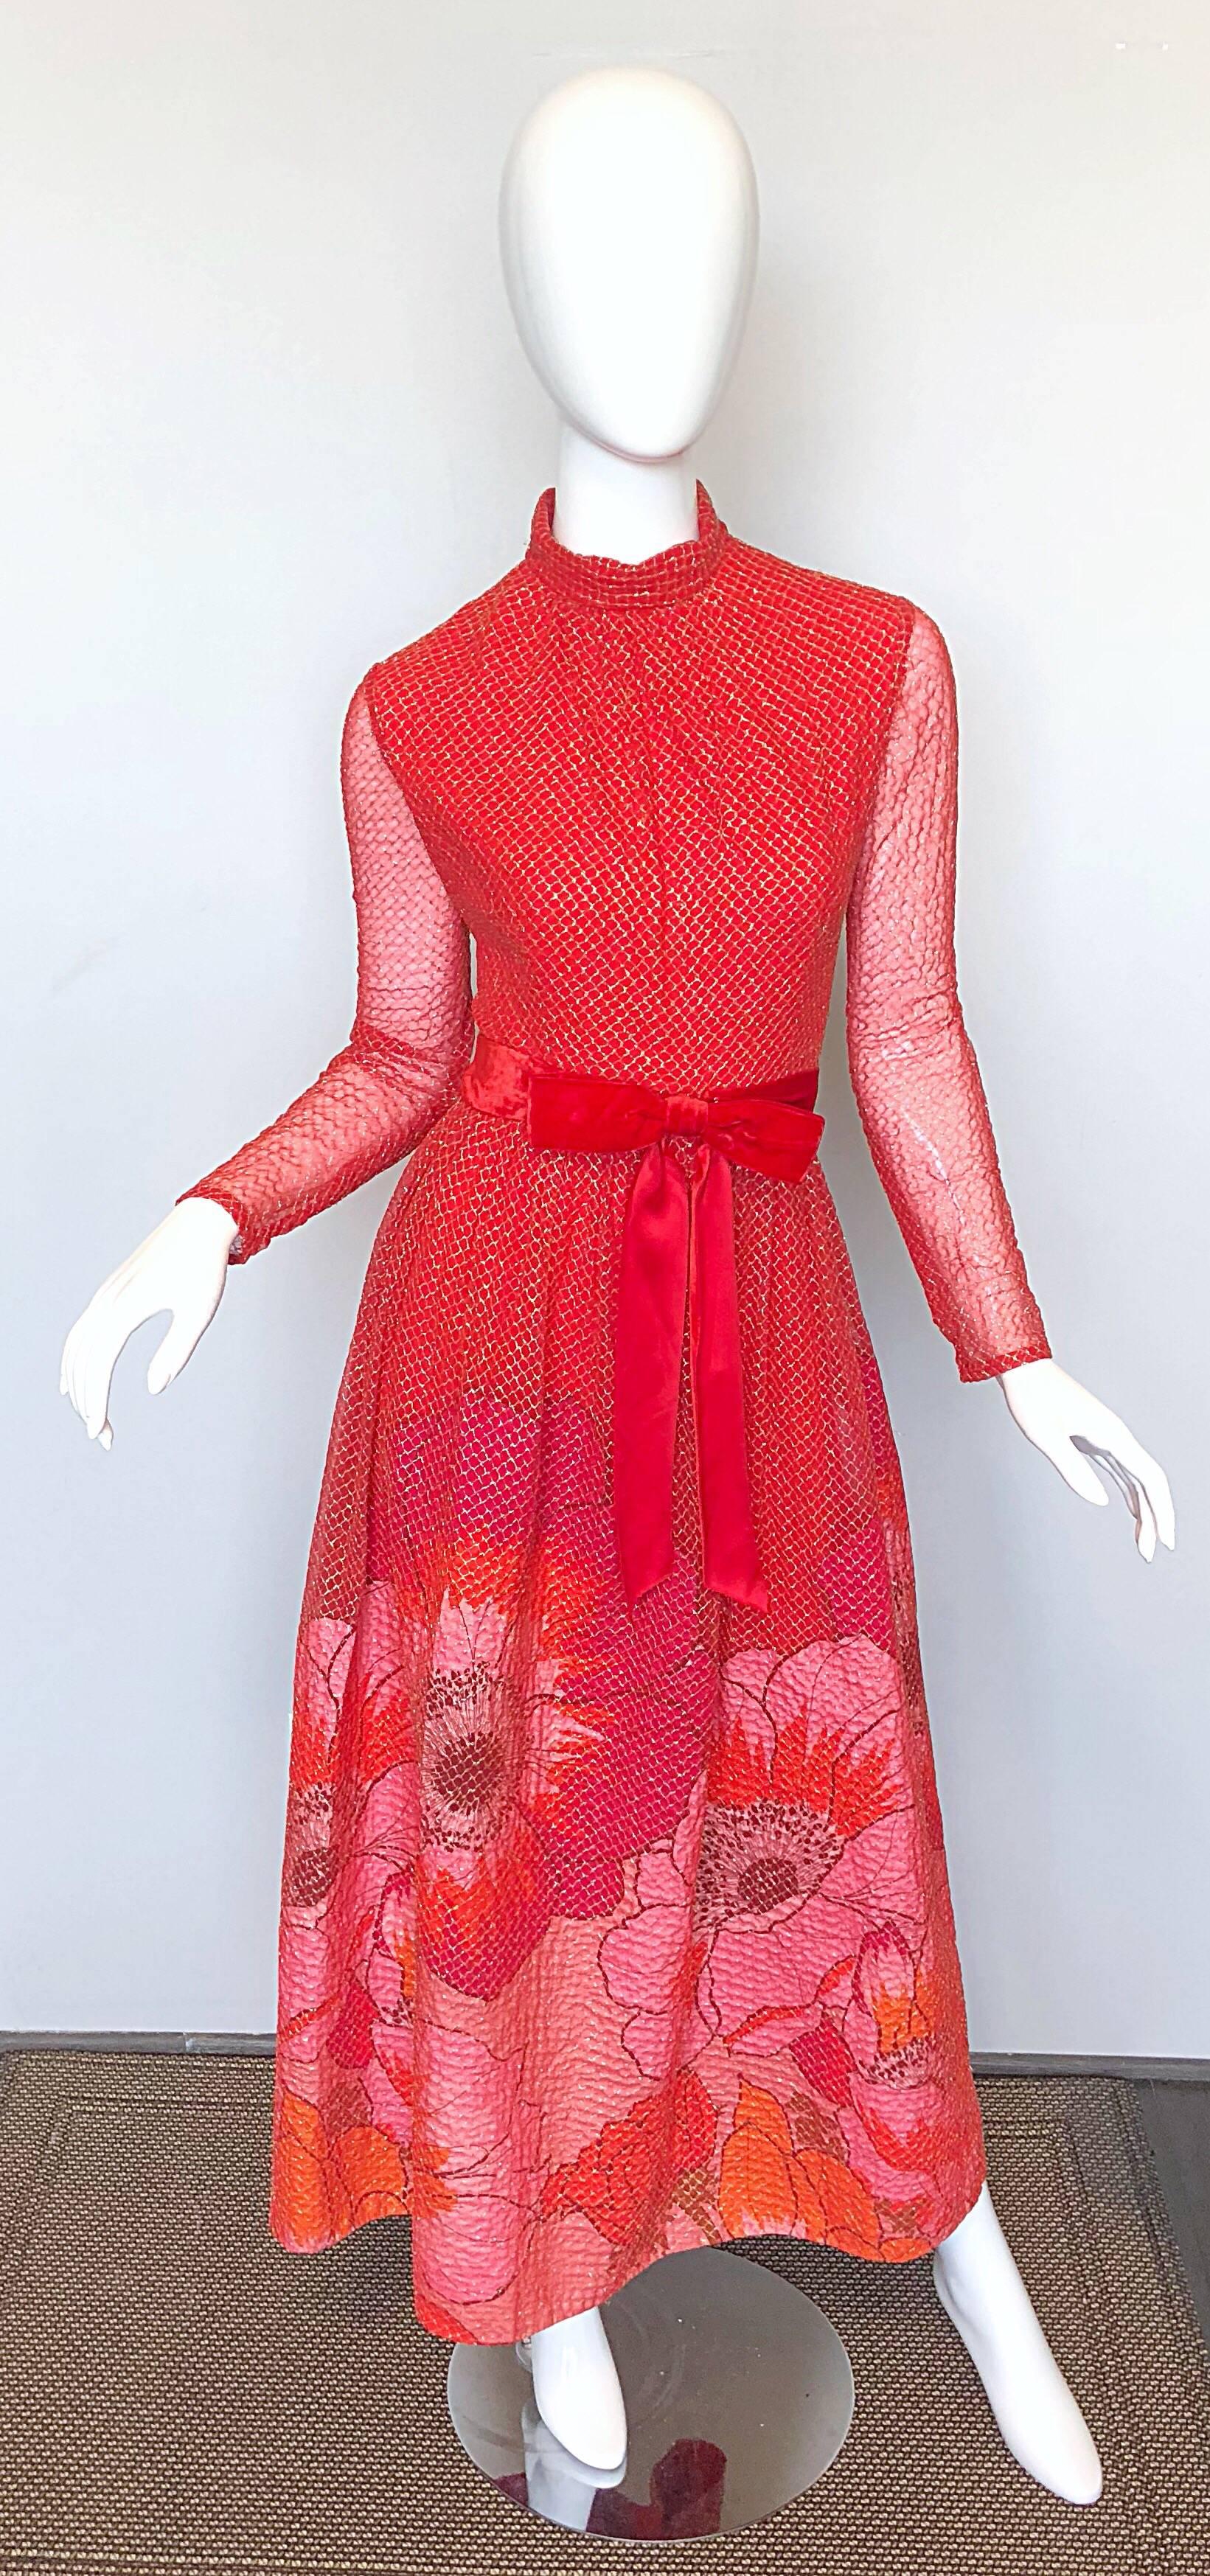 Gorgeous vintage 1970s MOLLIE PARNIS red, pink and gold gown / maxi dress! Tailored high neck bodice with a forgiving and flattering full skirt that features a red velvet bow belt. Long semi sheer sleeves with hidden snaps at each cuff. Pink and red